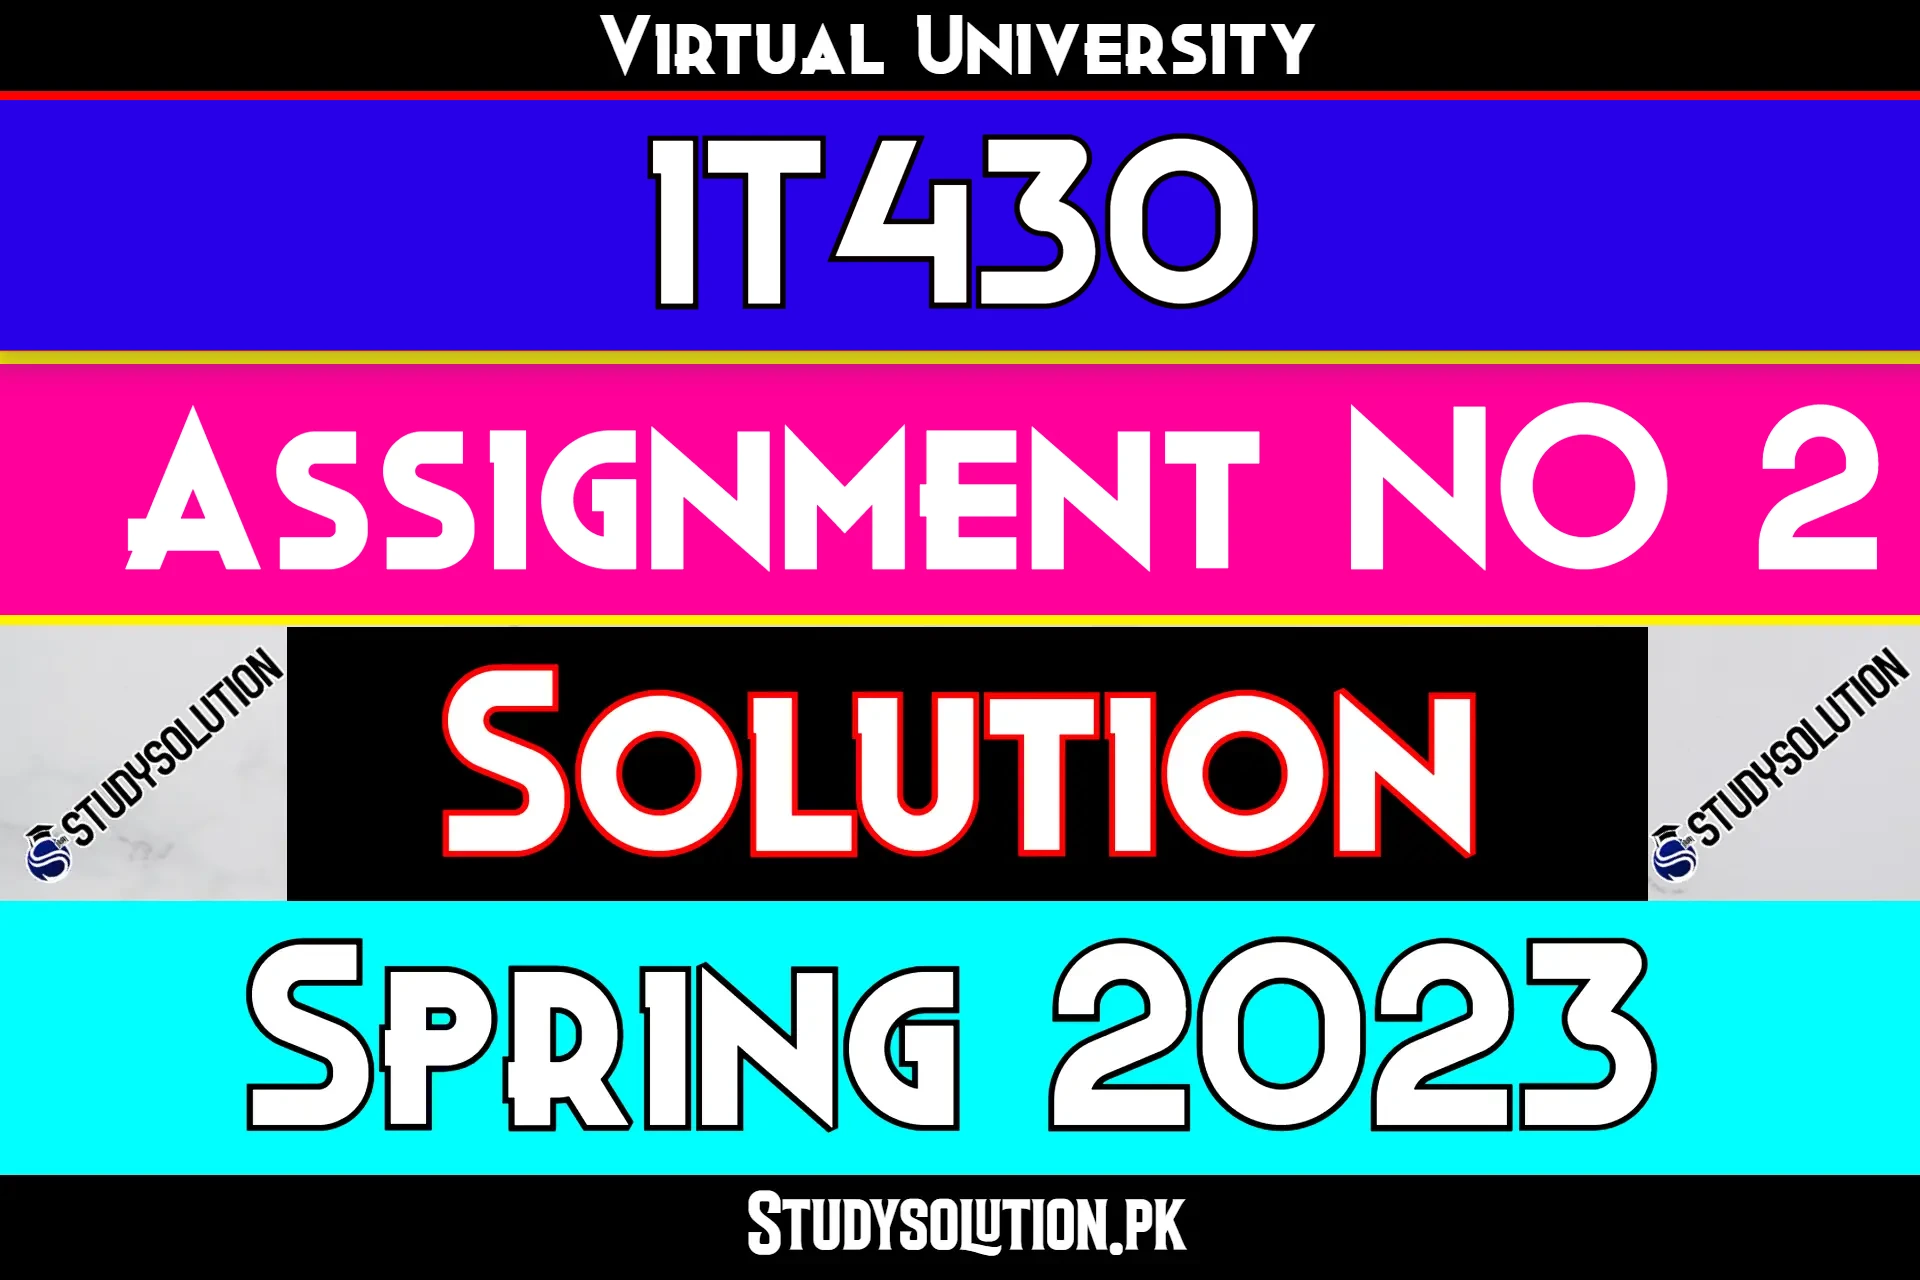 IT430 Assignment No 2 Solution Spring 2023